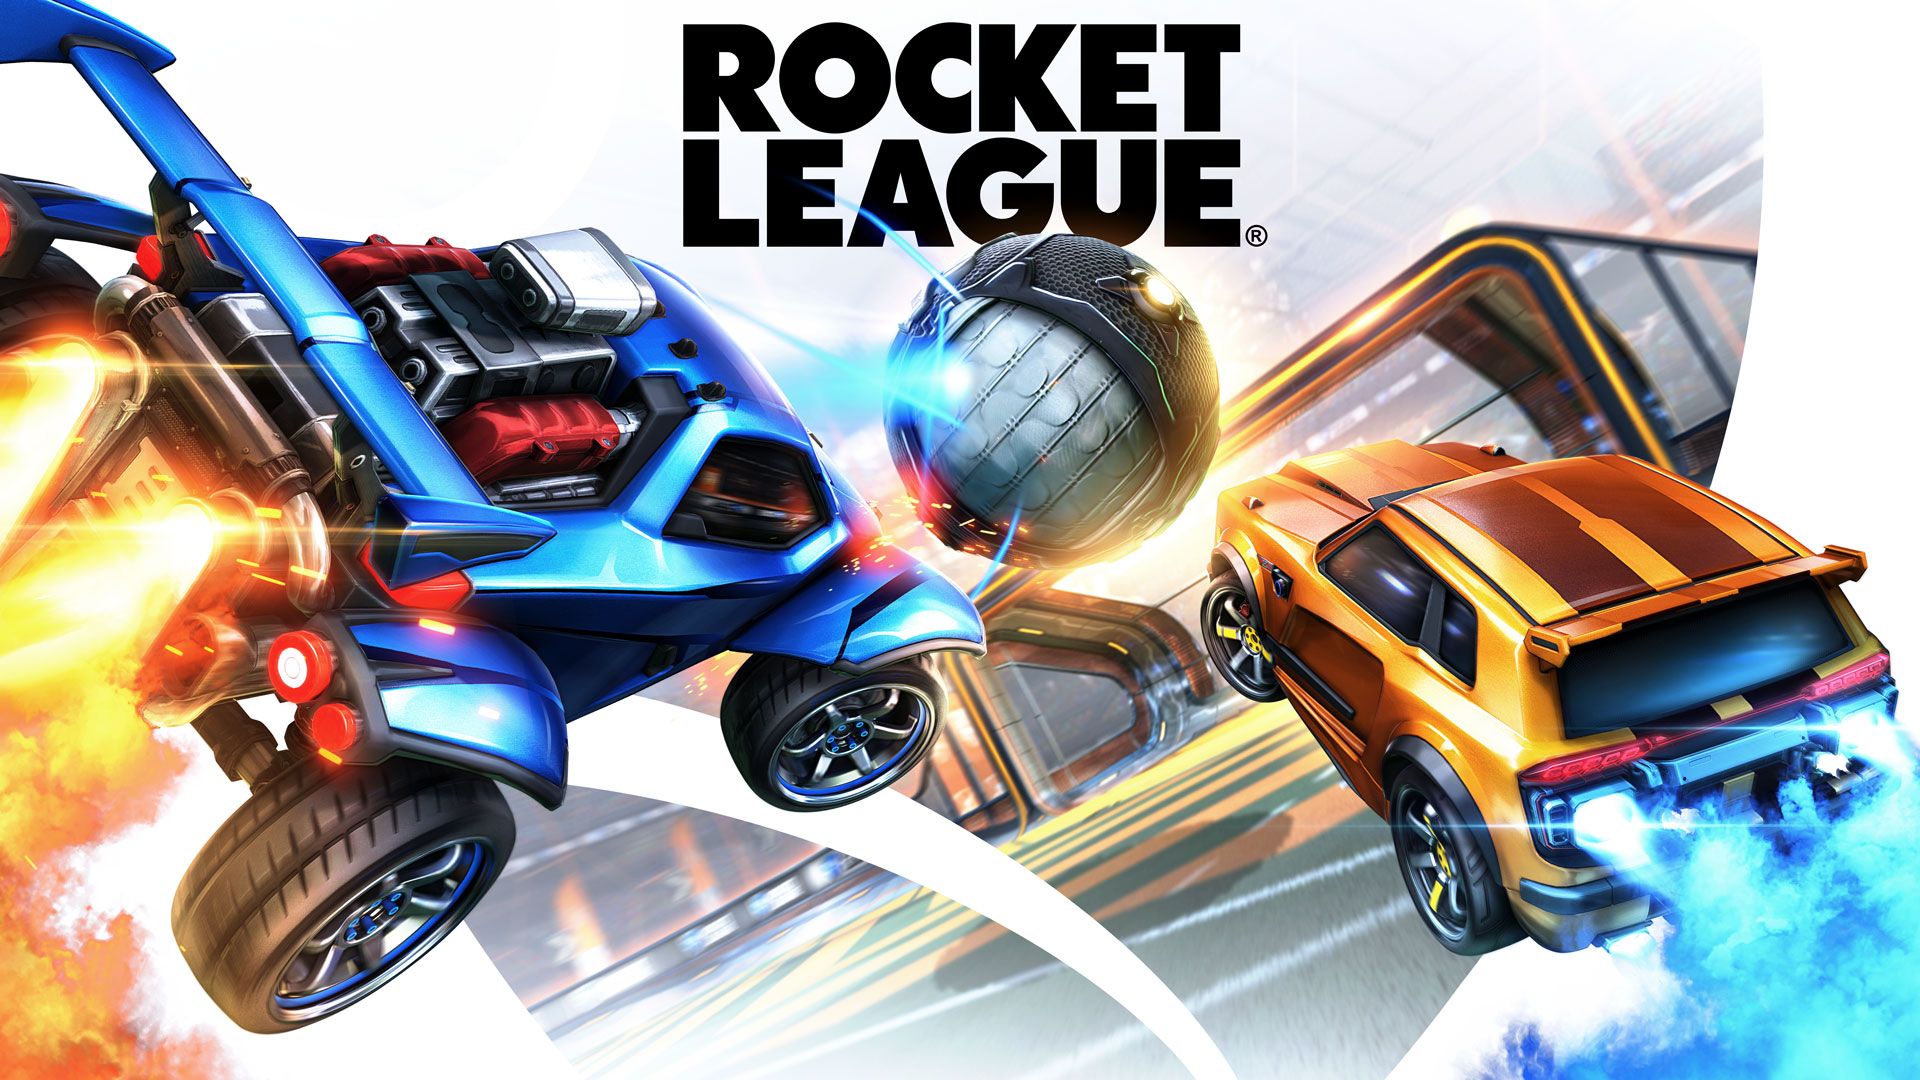 Rocket League launches its new competitive season on all platforms today